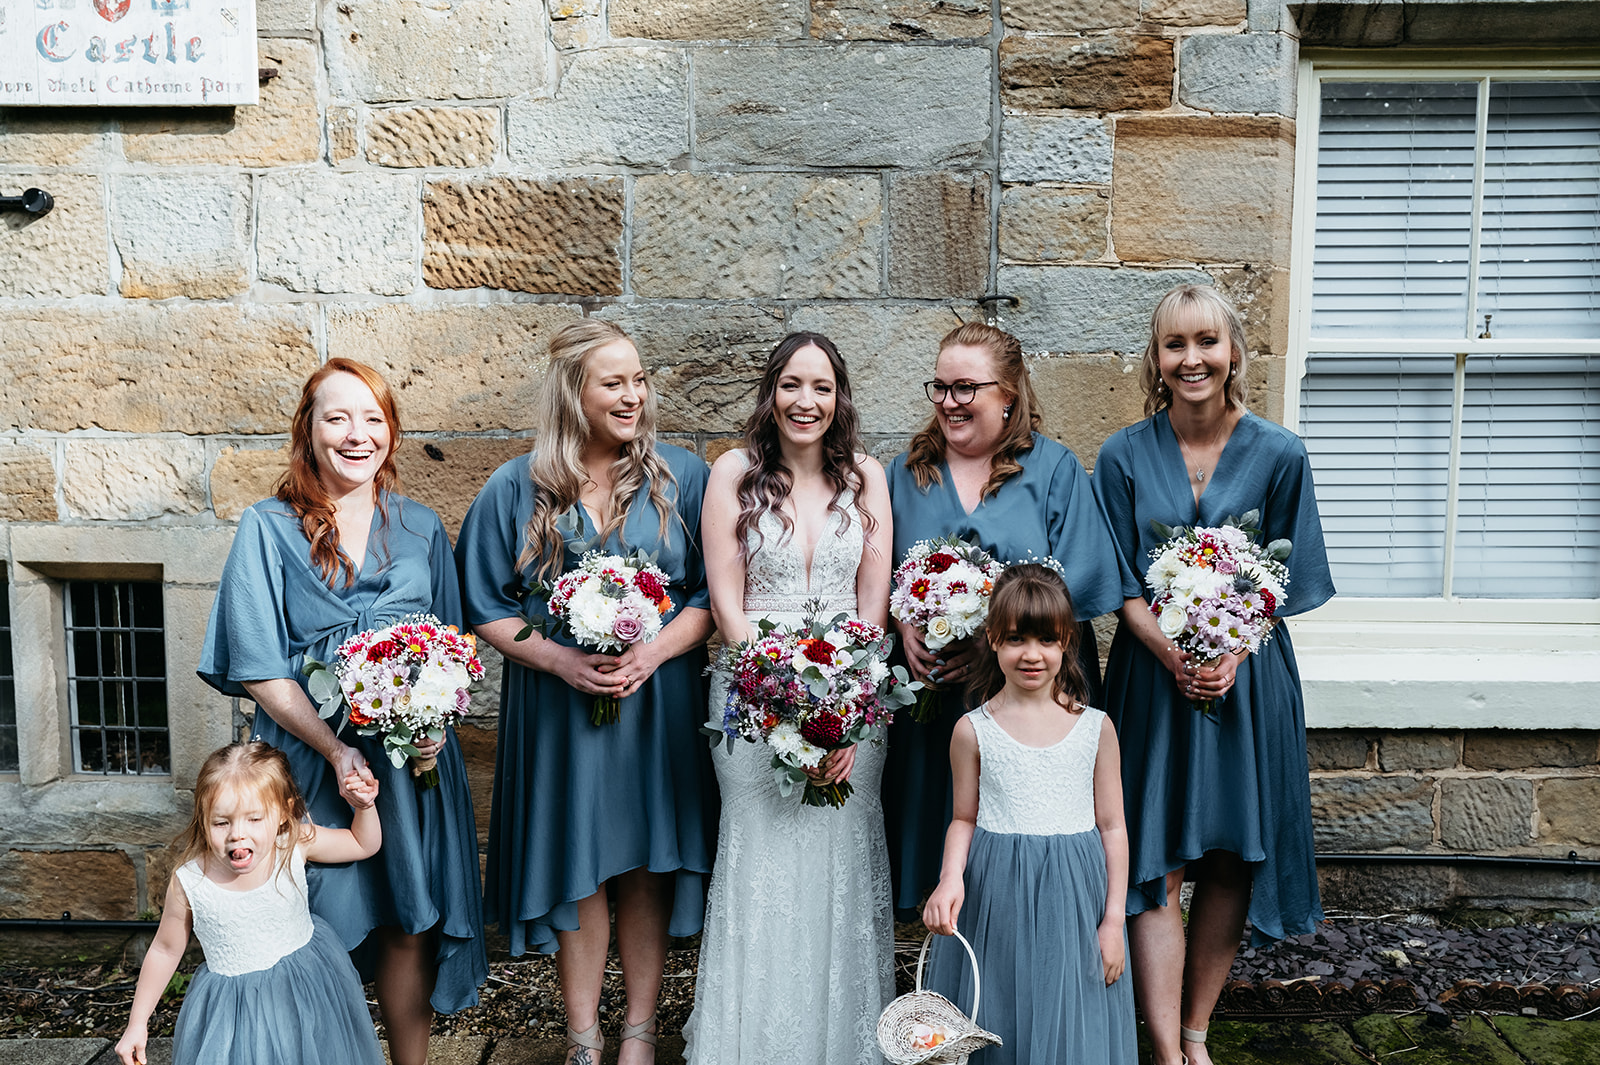 A joyful group photo featuring Adelle, and their wedding party, posing together in front of the stunning danby castle